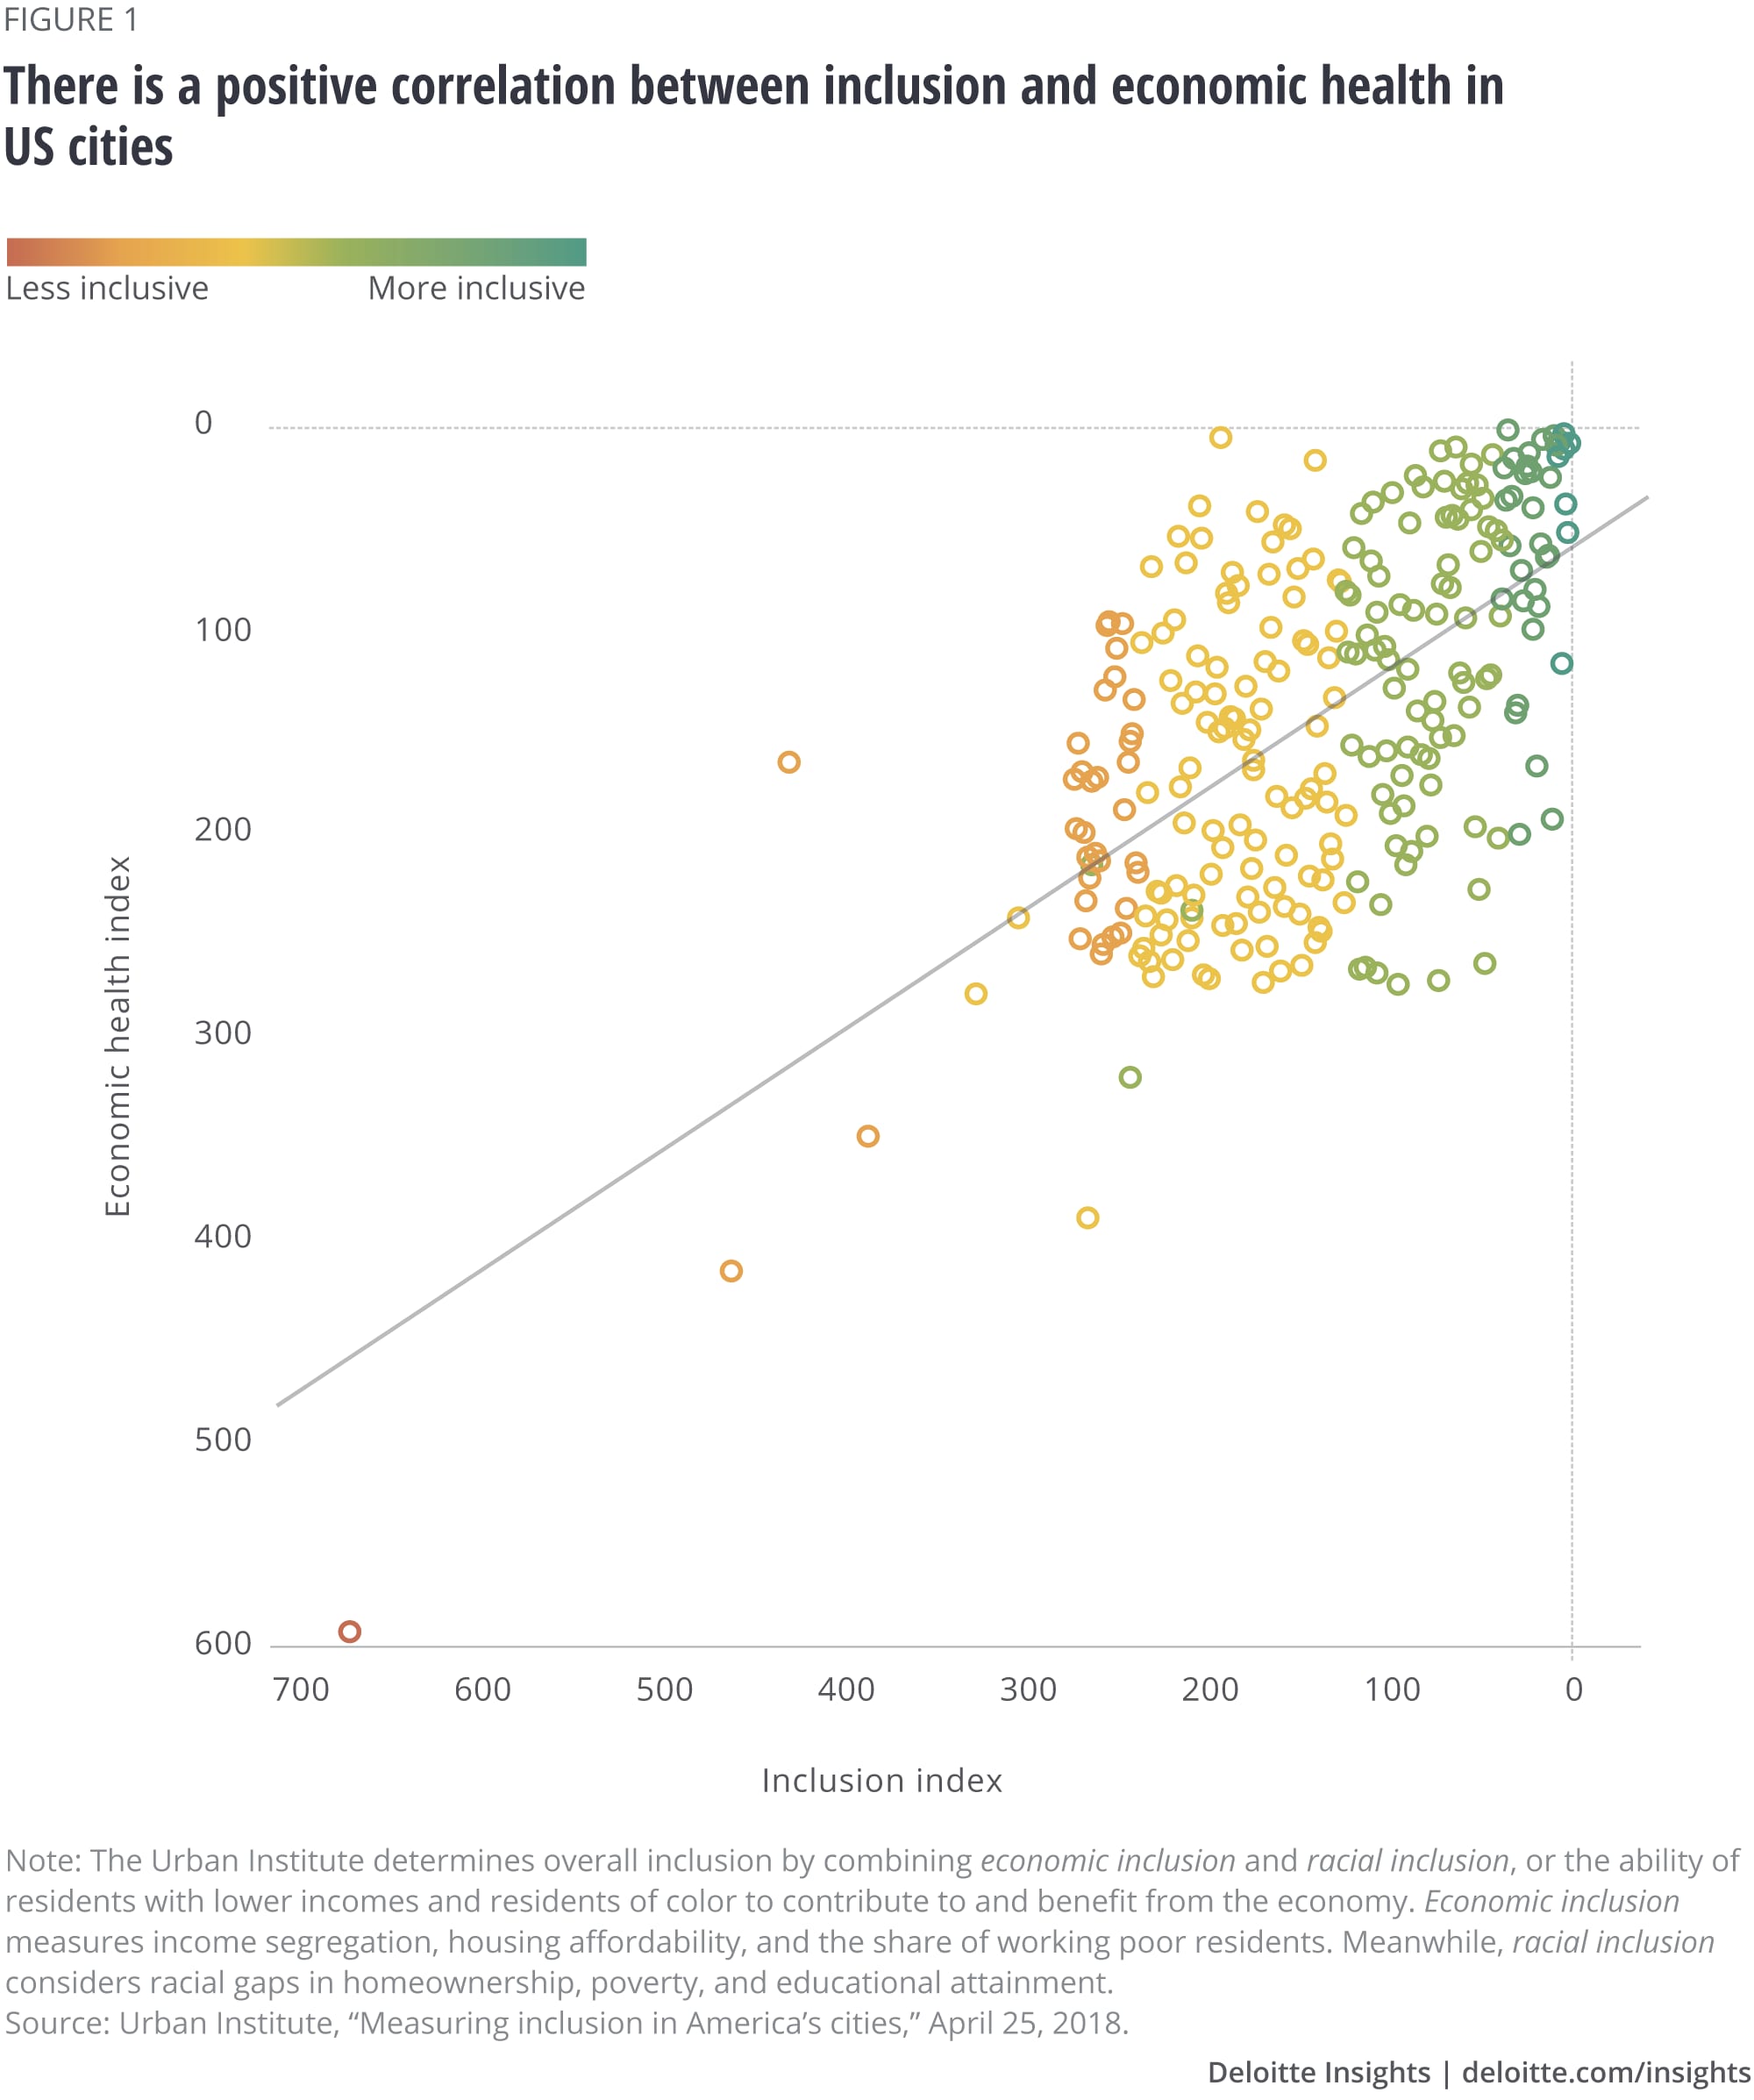 There is a positive correlation between inclusion and economic health in US cities